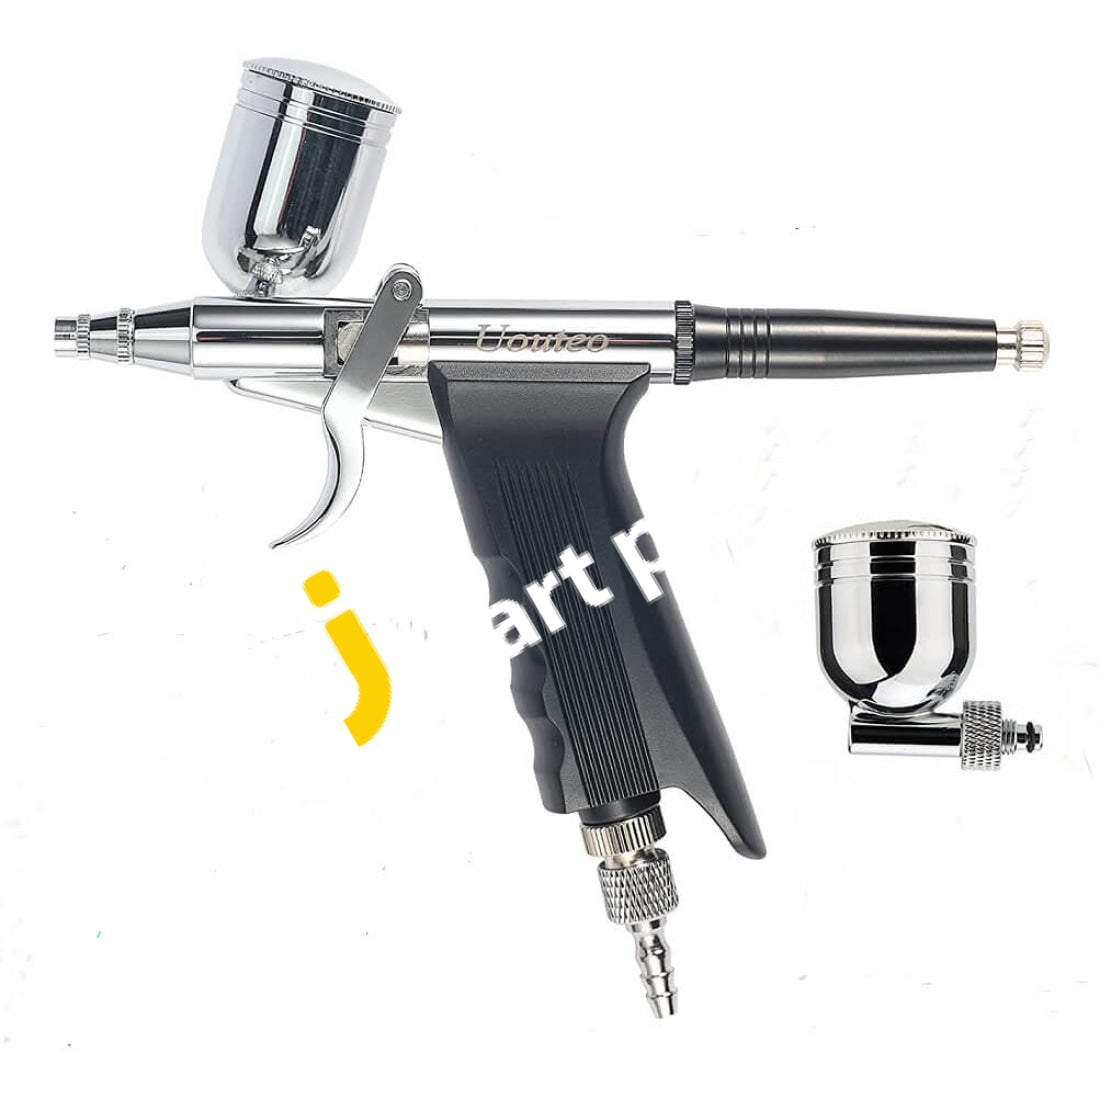 Airbrush Trigger Gun Air Brush With 0.3 Mm Needles 7Cc & 10 Cc Cup For Art Painting Tattoo Cake